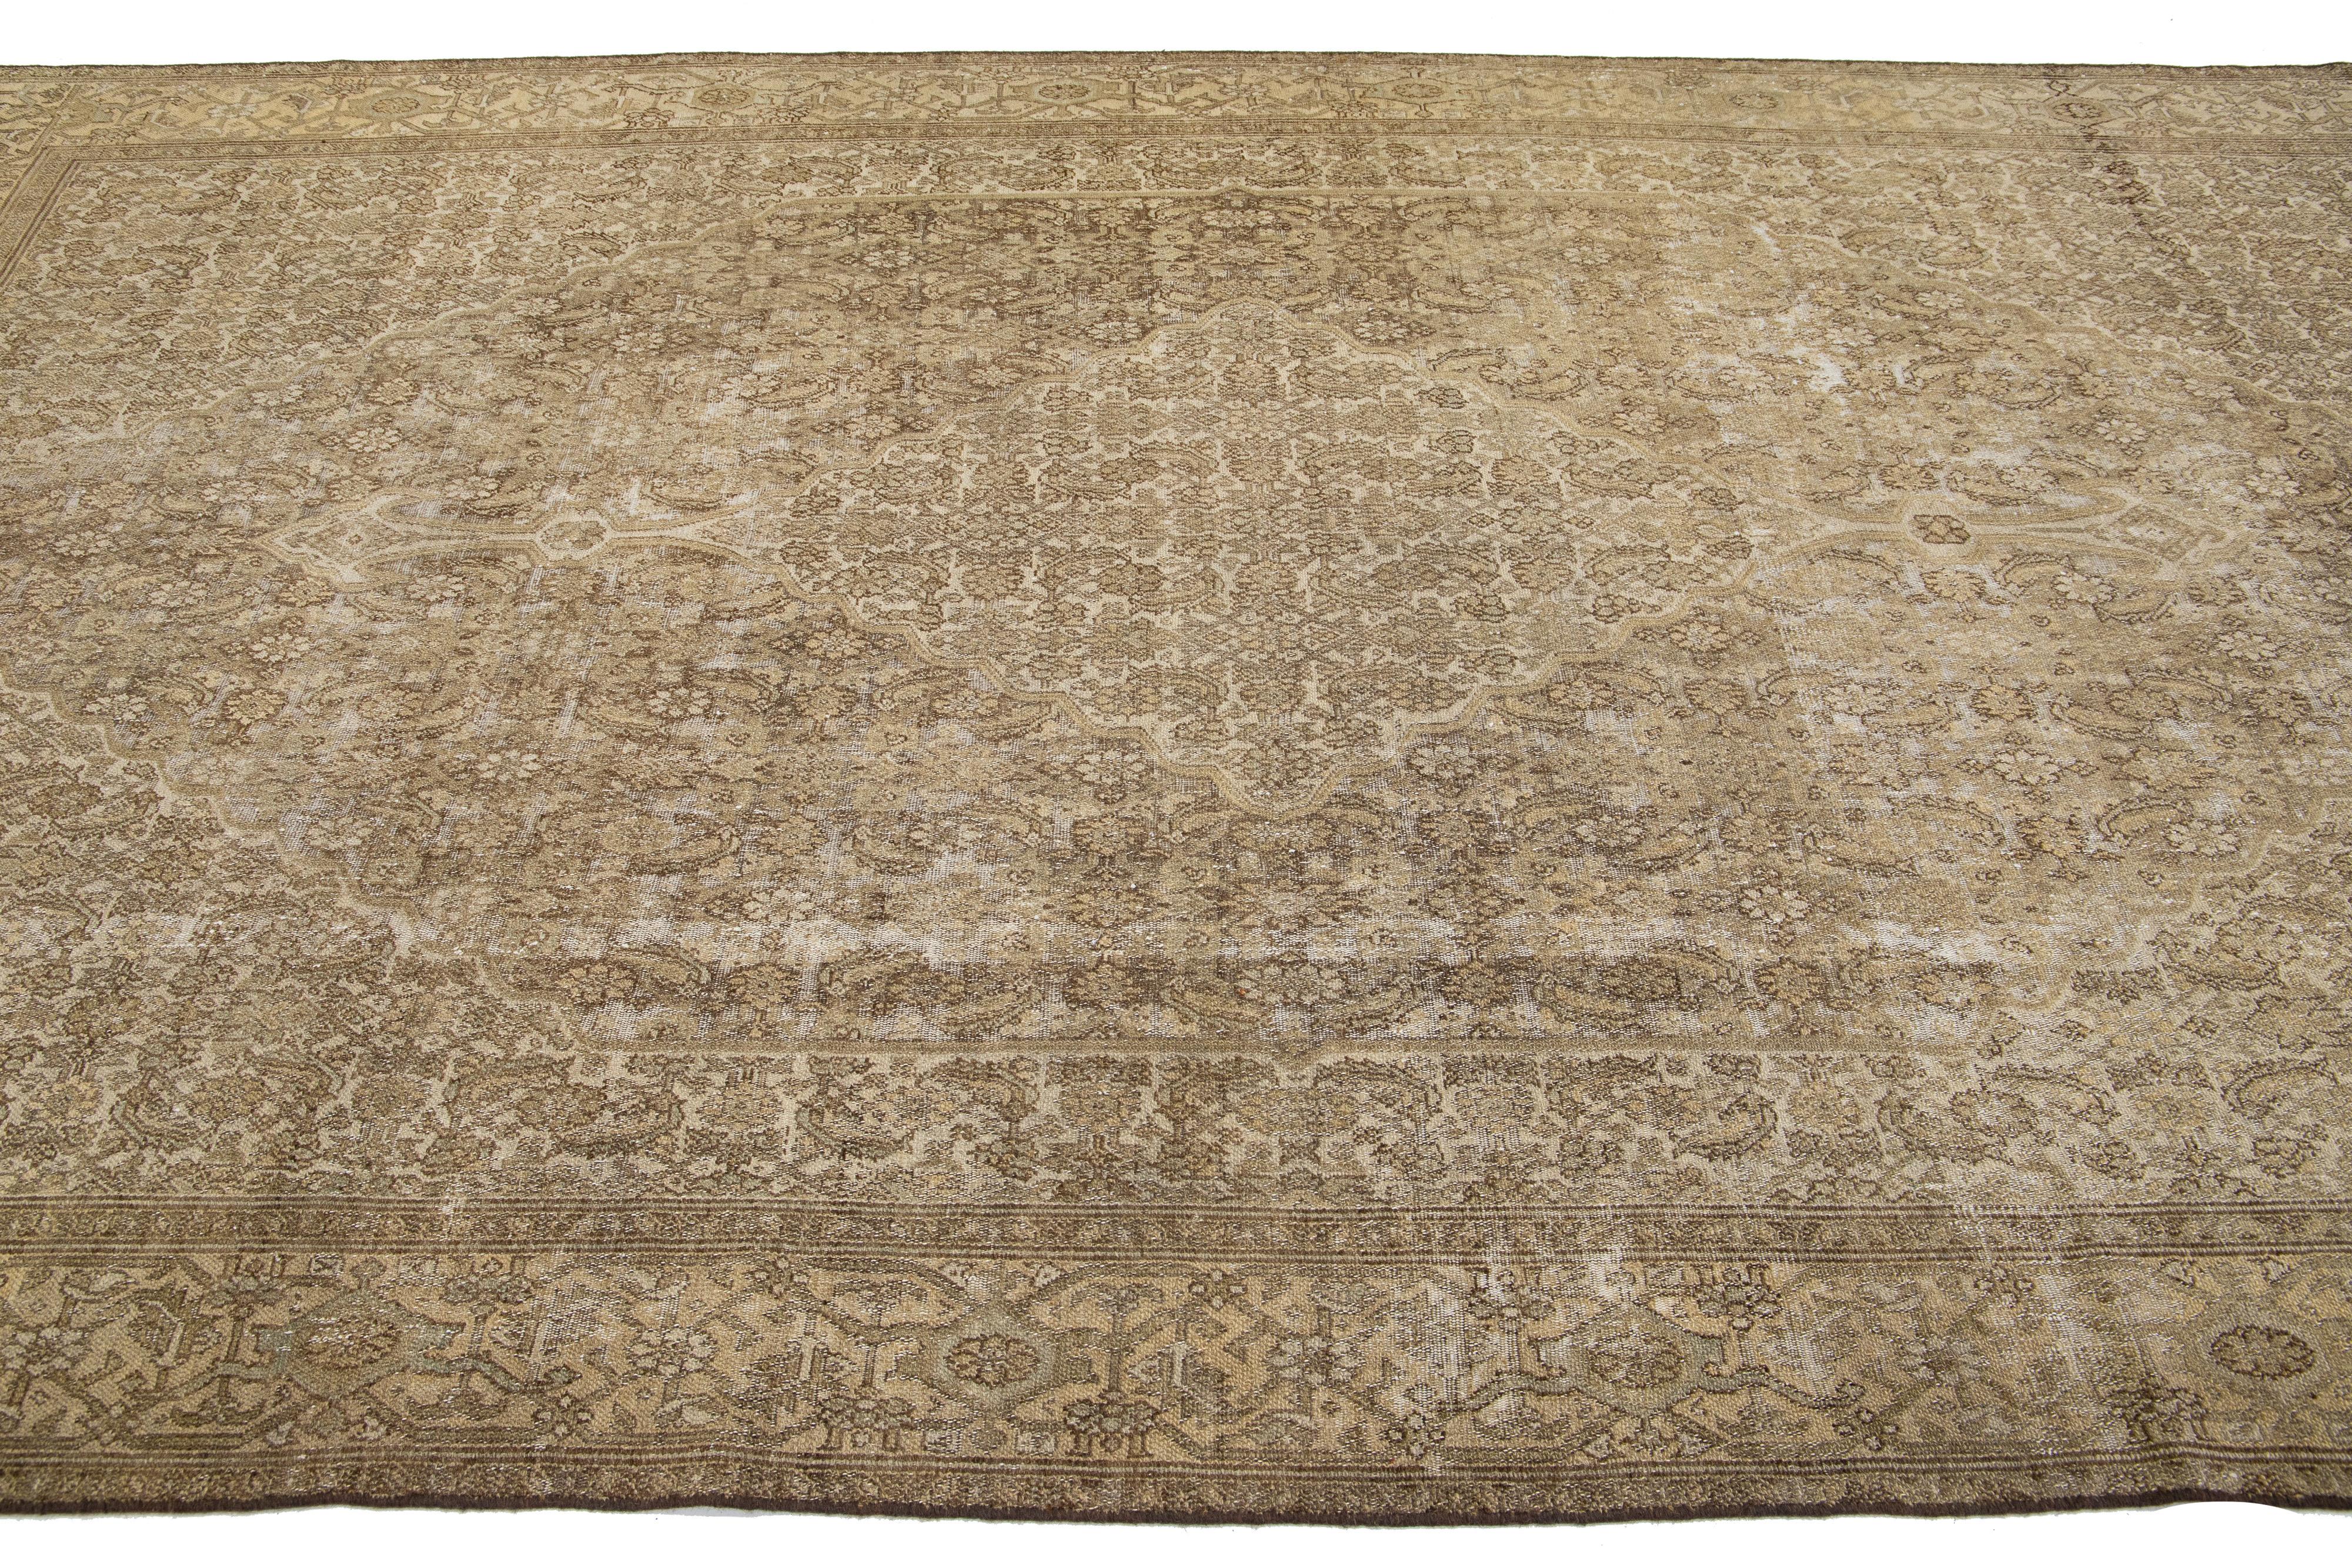 Brown Persian Malayer Wool Rug HandCrafted in the 1910s (Handgeknüpft) im Angebot